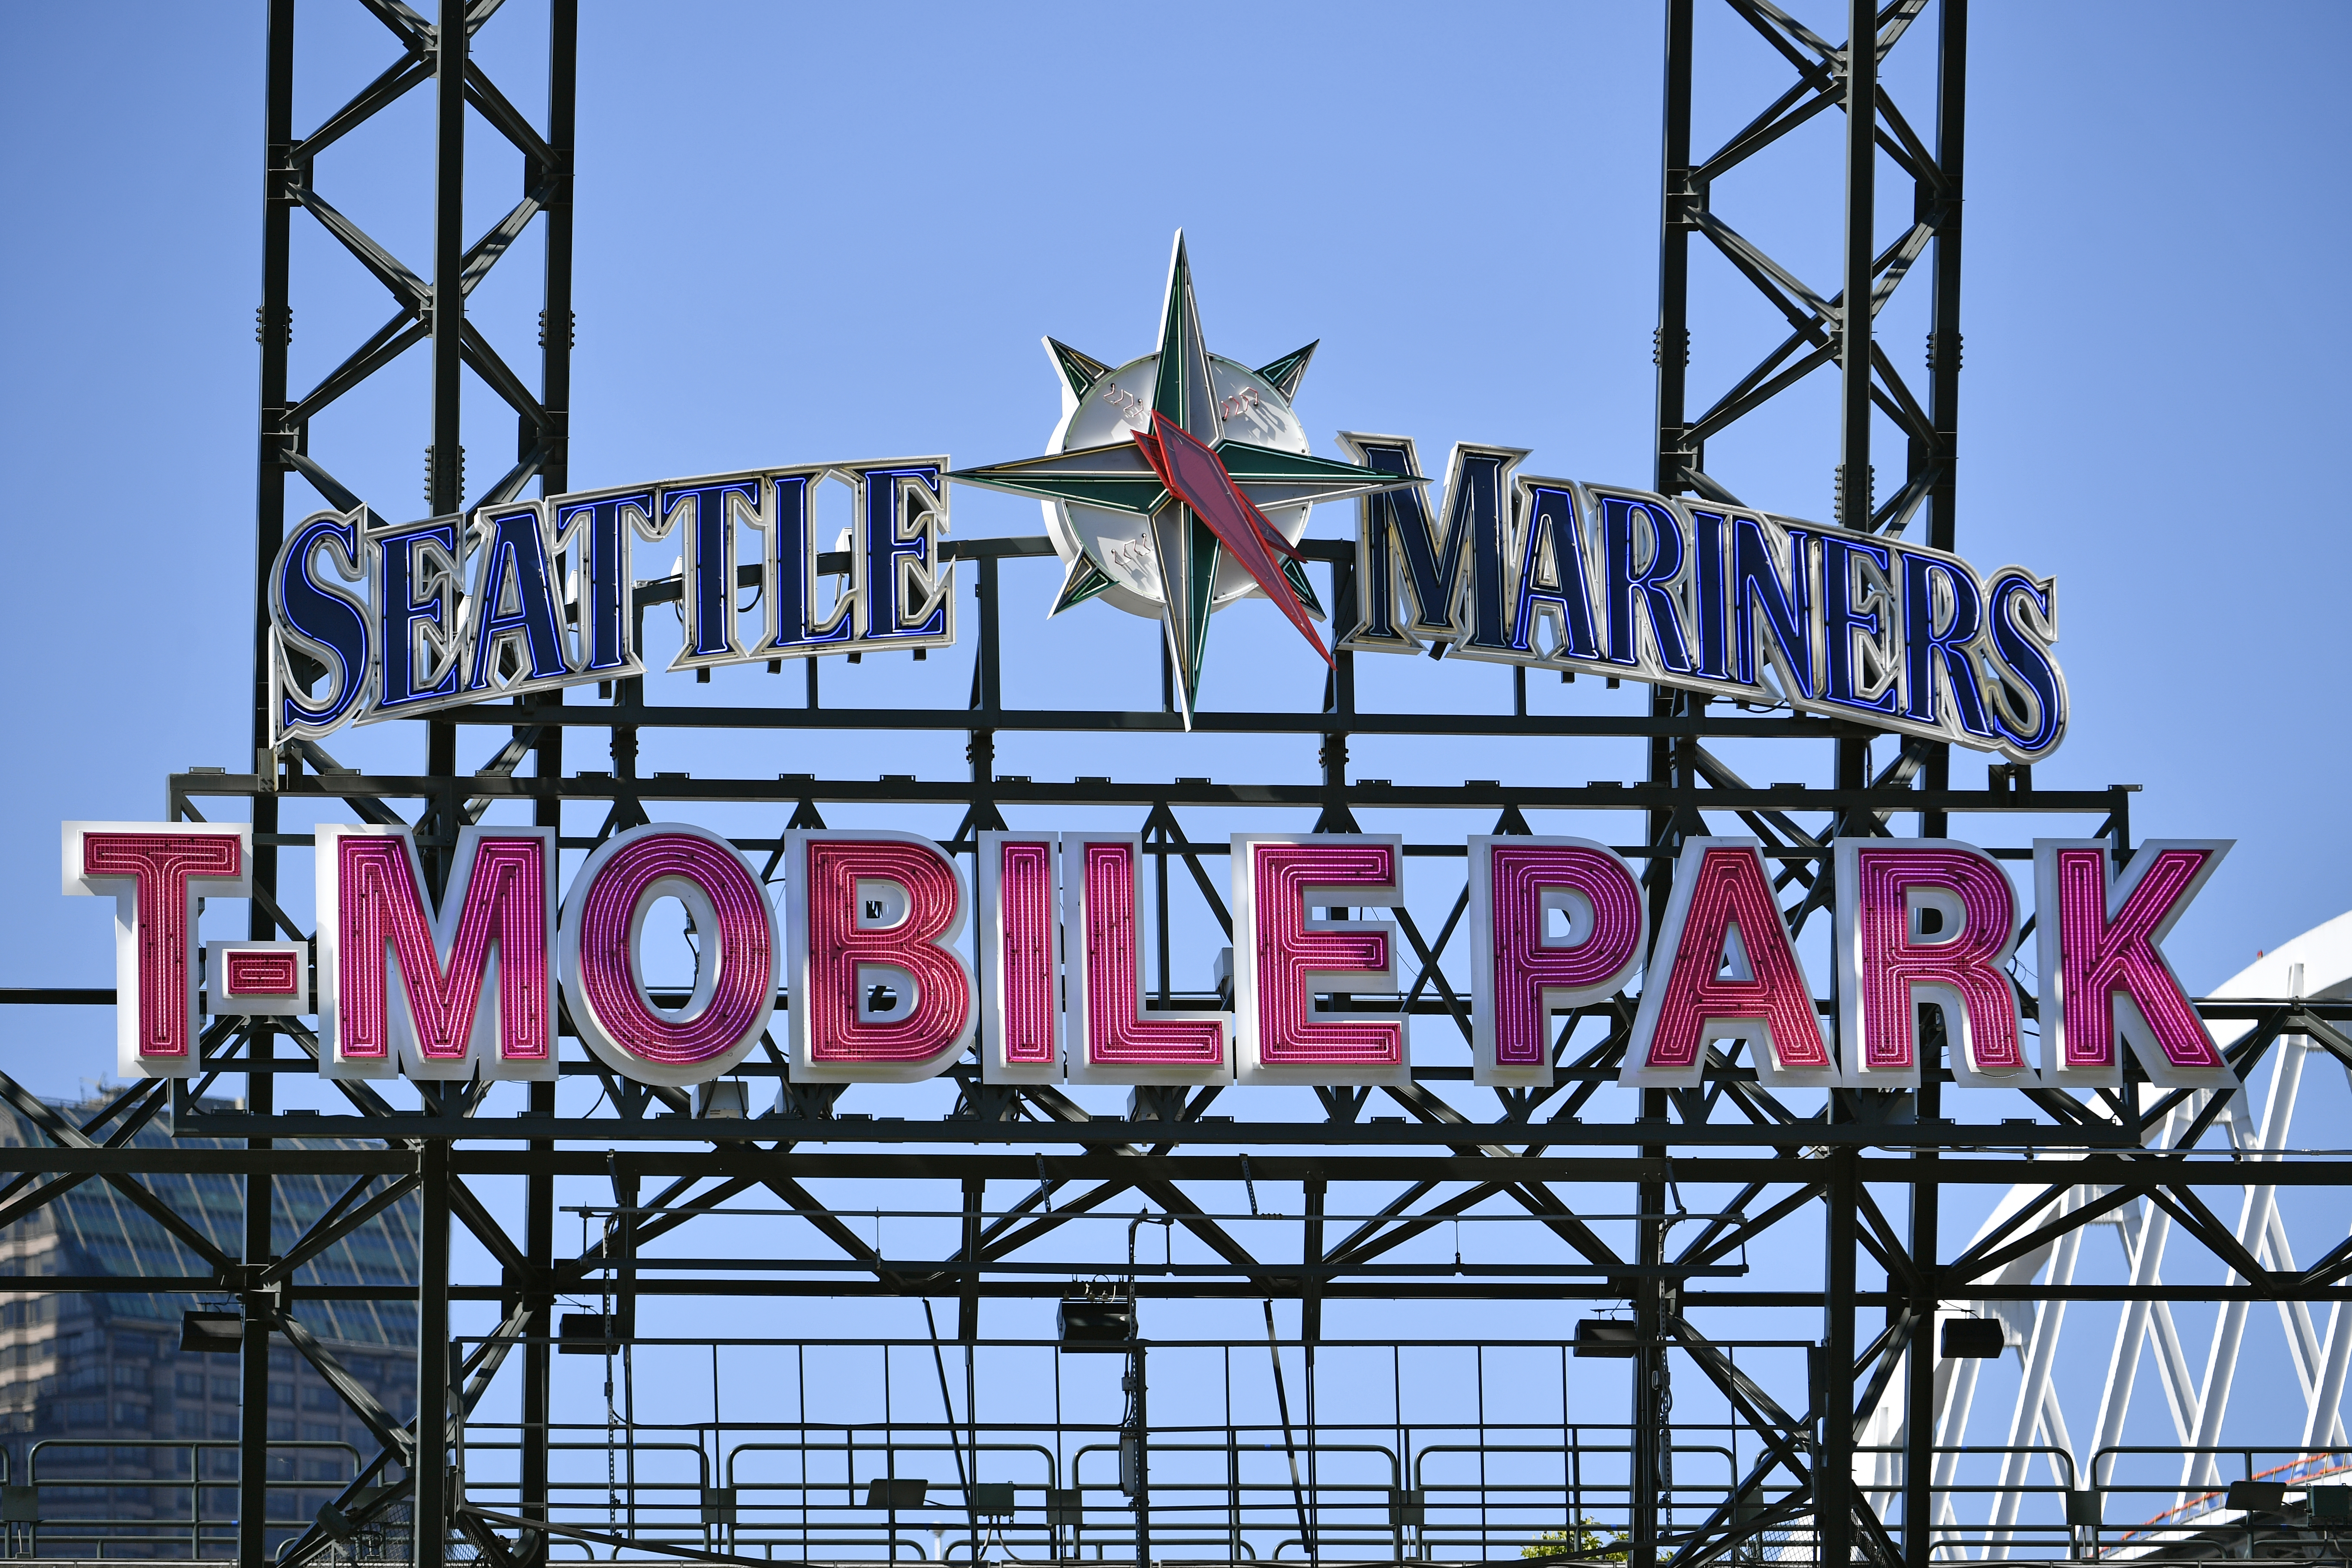 T-Mobile Park - Seattle Mariners